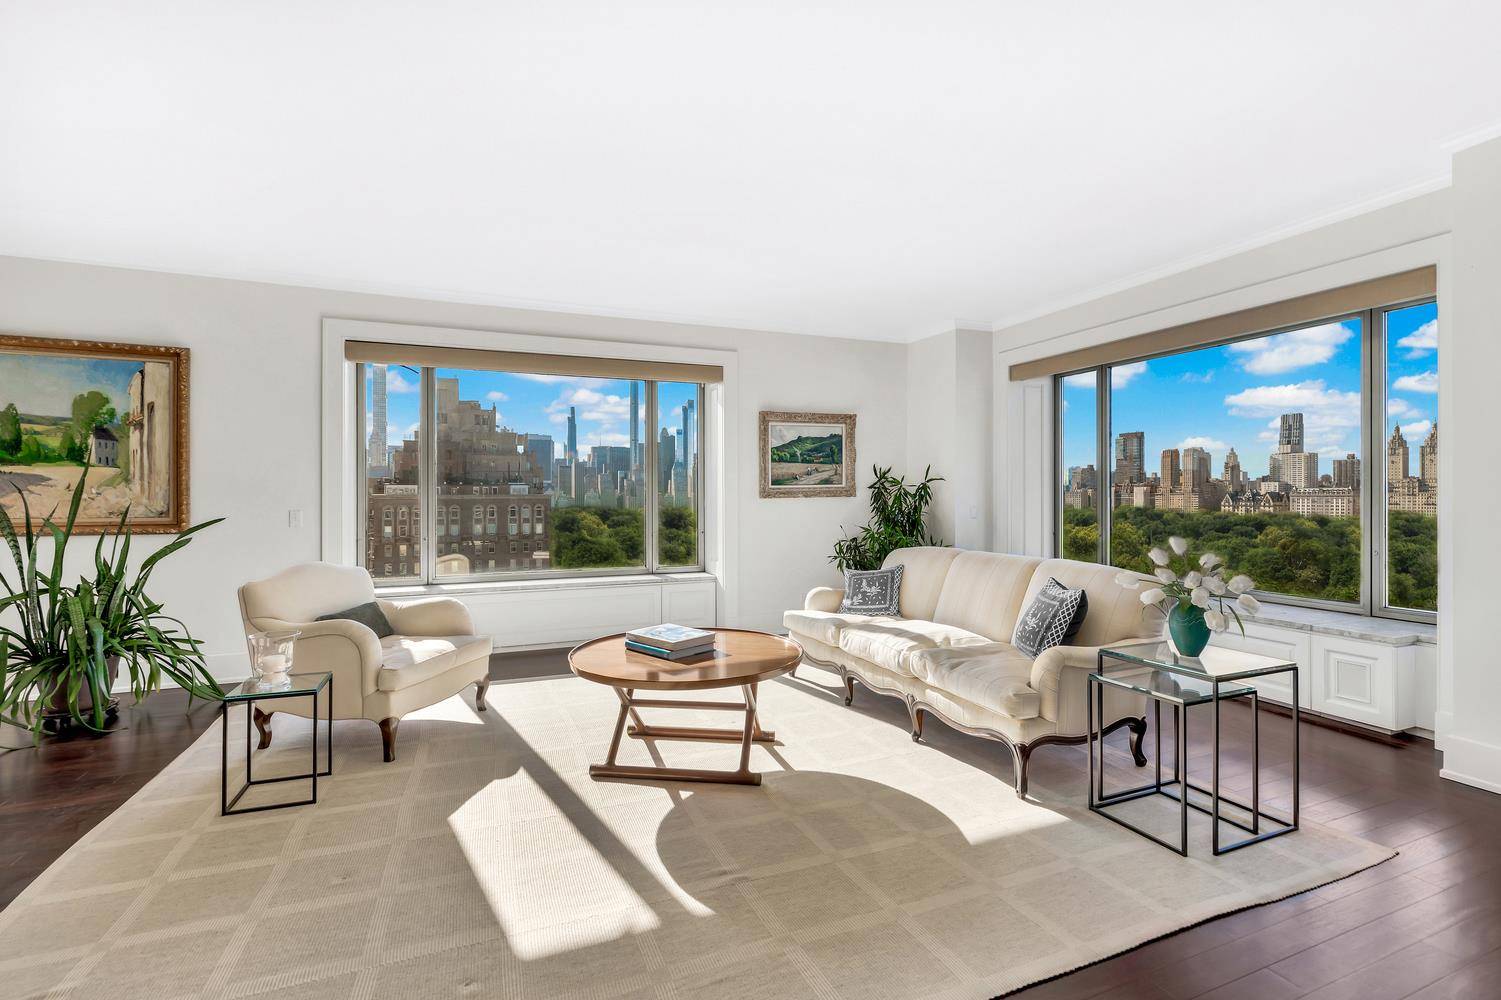 Fifth Avenue Dream ! First time available, this spectacular corner apartment with unobstructed, sweeping vistas of Central Park and the NYC Skyline is the thing dreams are made of !